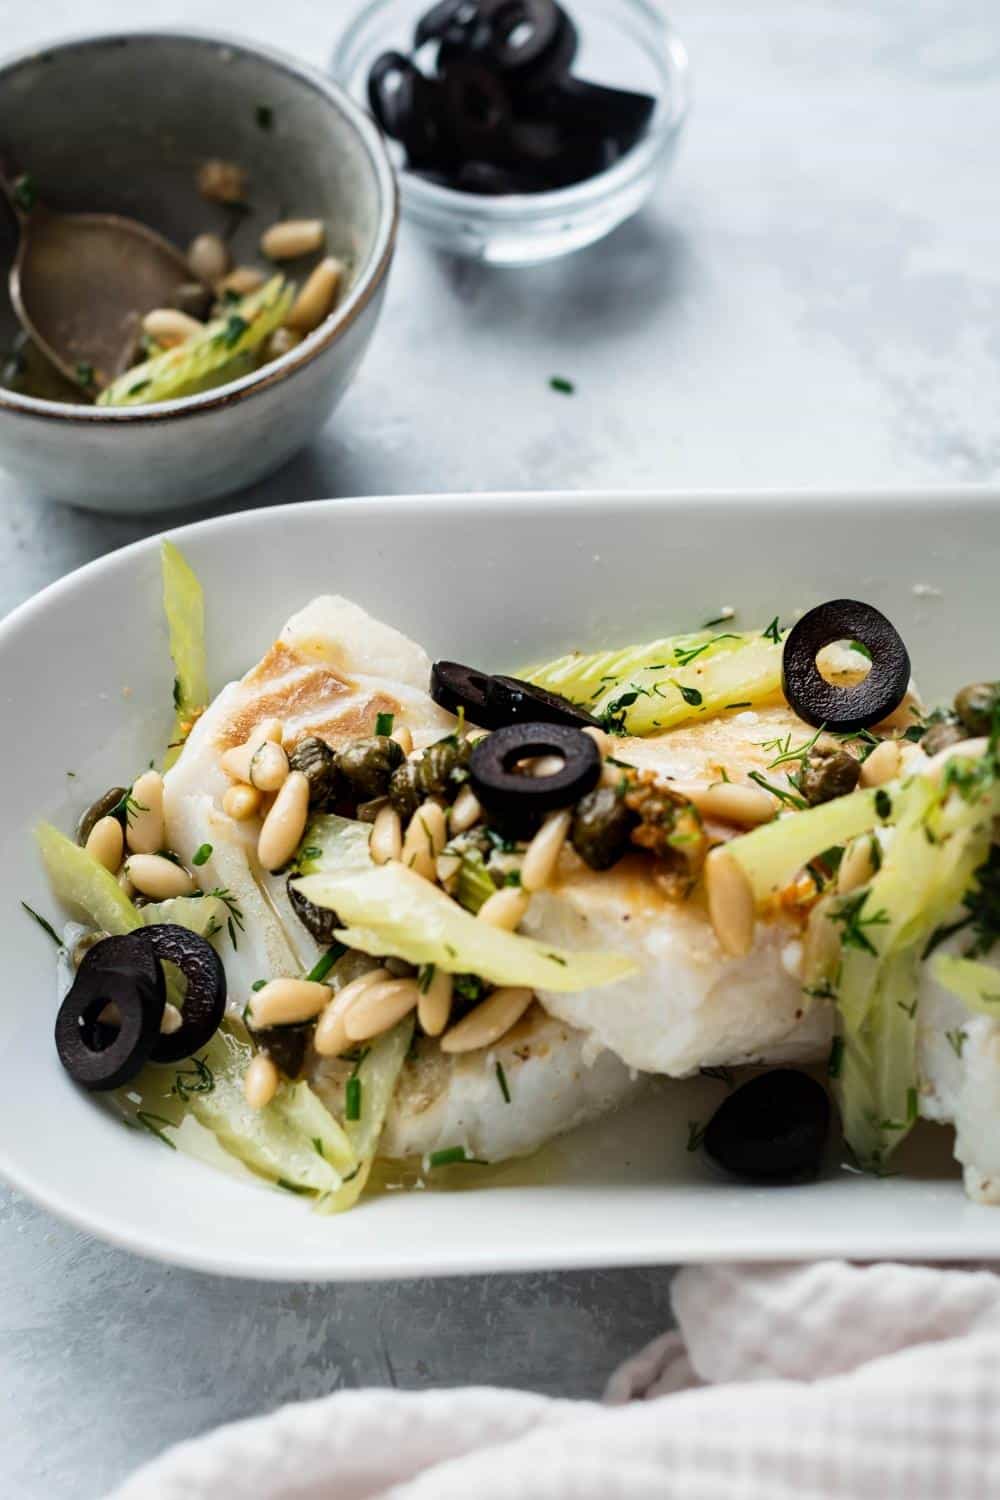 Black olives and pine nuts on top of halibut fillets on a white plate.